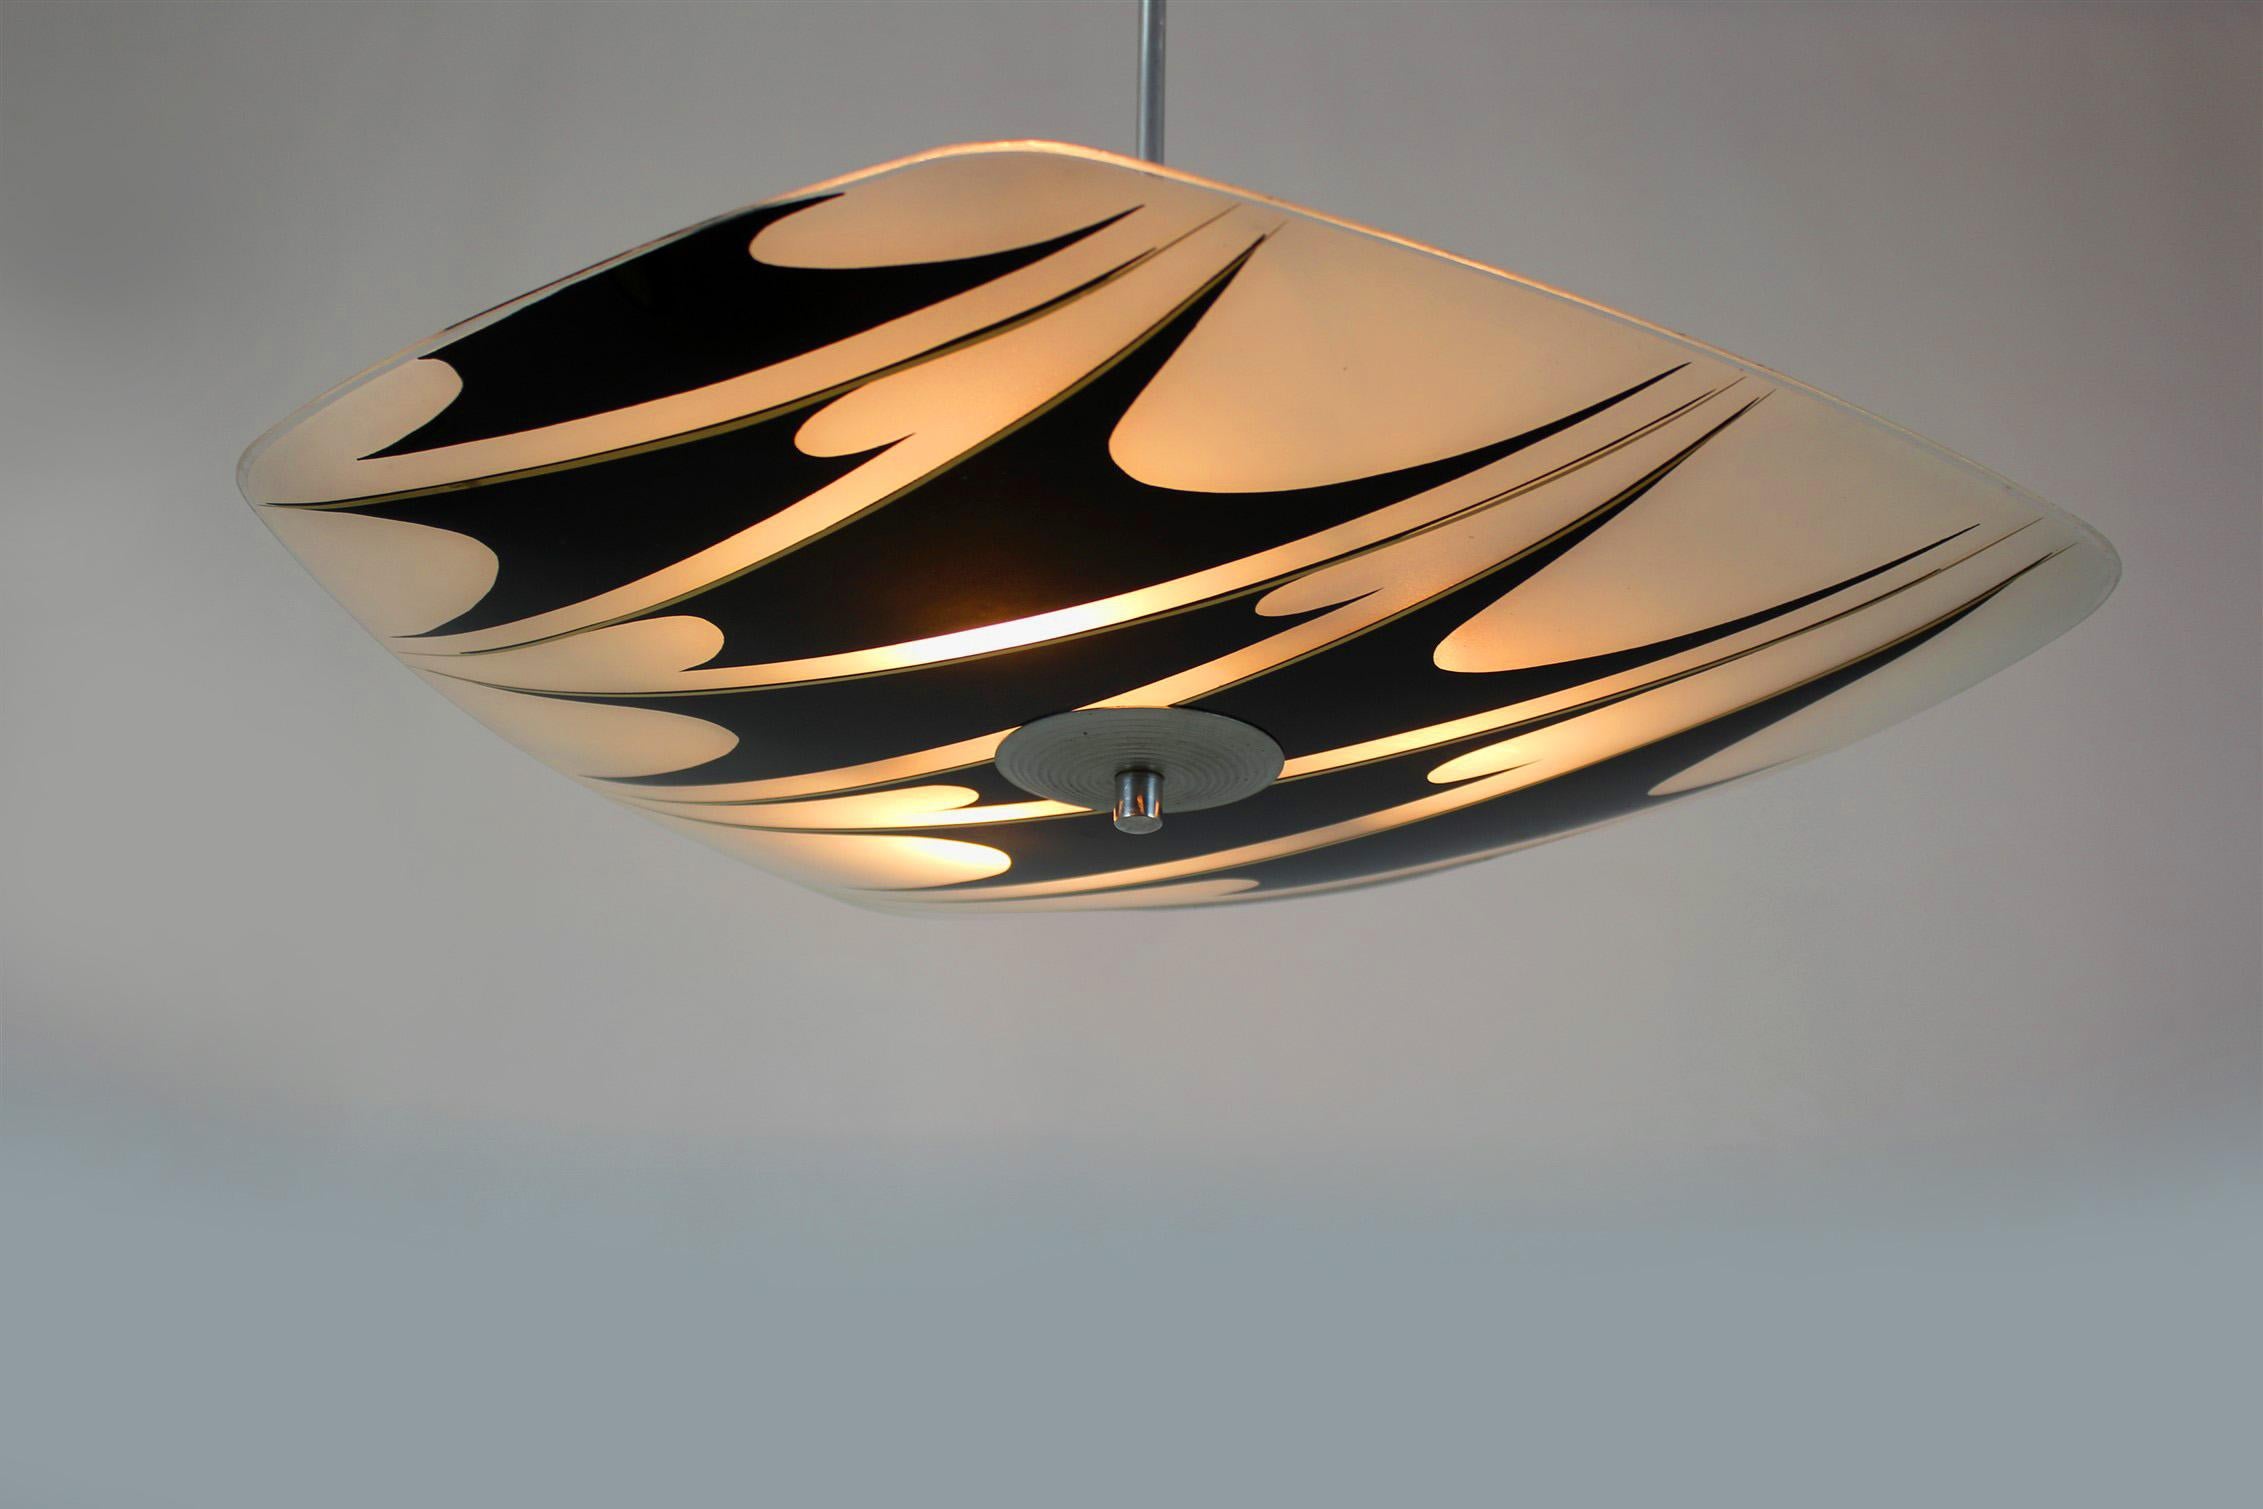 Czech Midcentury Patterned Ceiling Lamp from Napako, 1960s